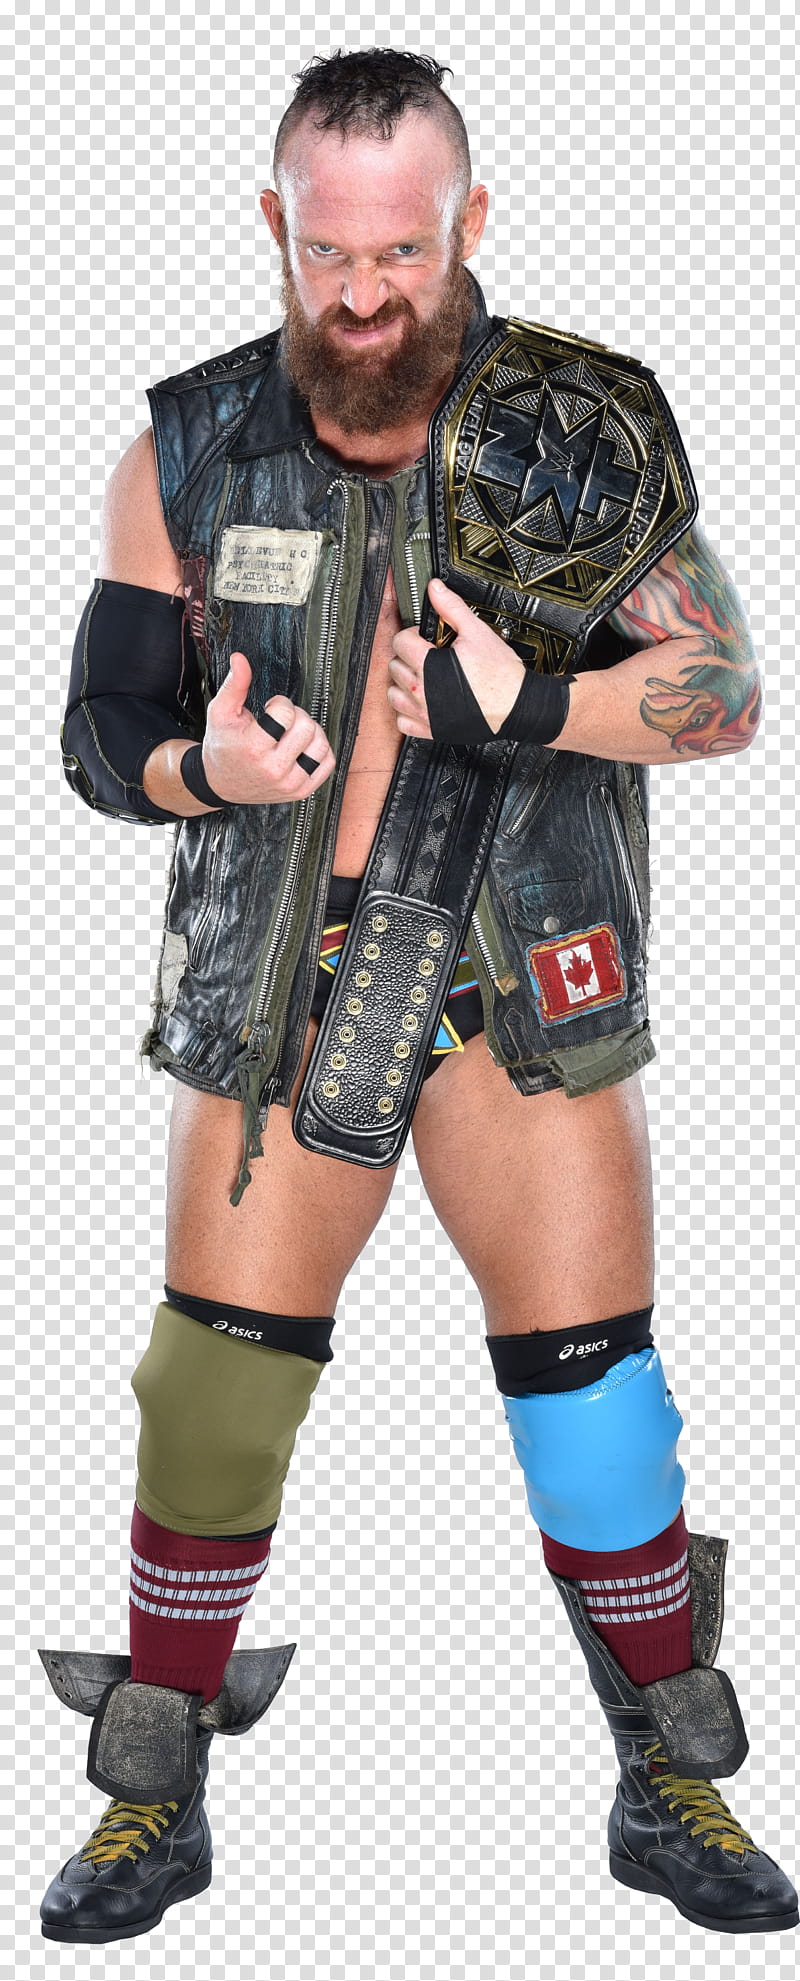 Eric Young NXT Tag Team Champion Render transparent background PNG clipart